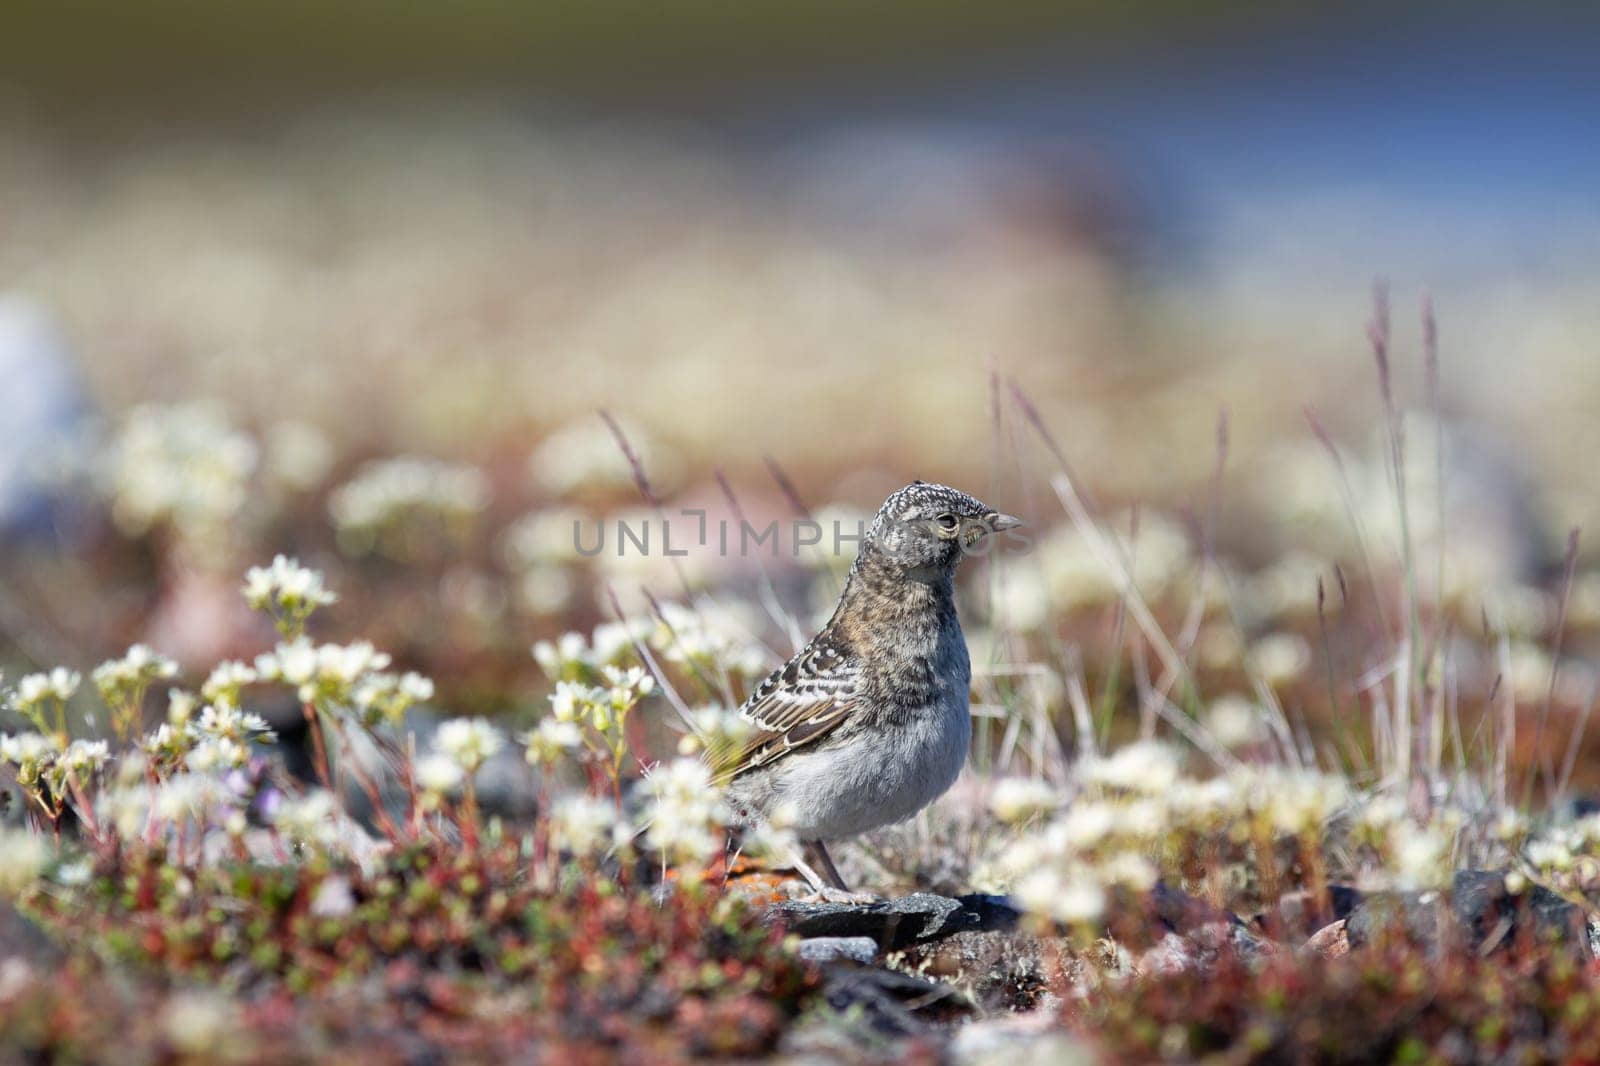 Immature horned lark or shore lark standing between plants in Canada's arctic by Granchinho